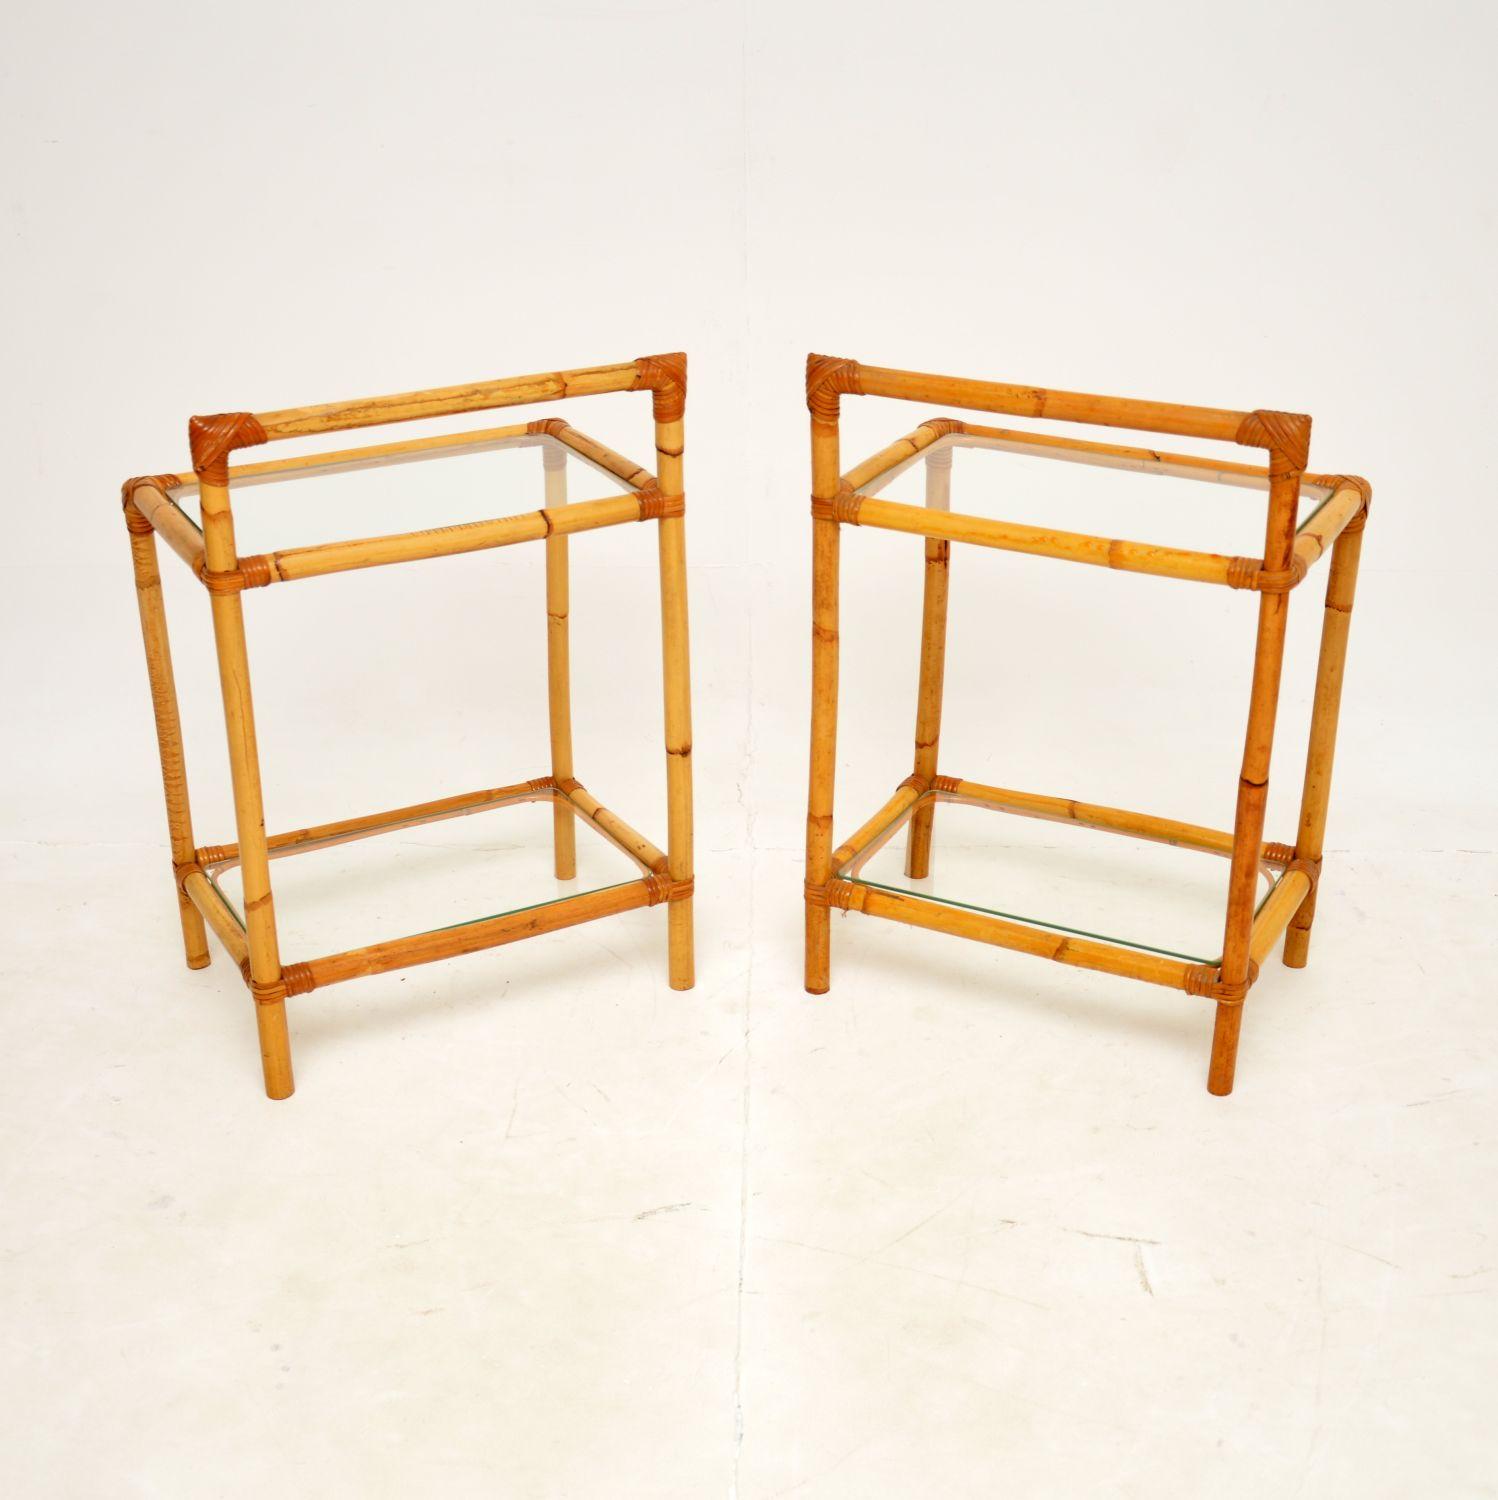 British 1970's Pair of Vintage Bamboo Side Tables by Angraves For Sale